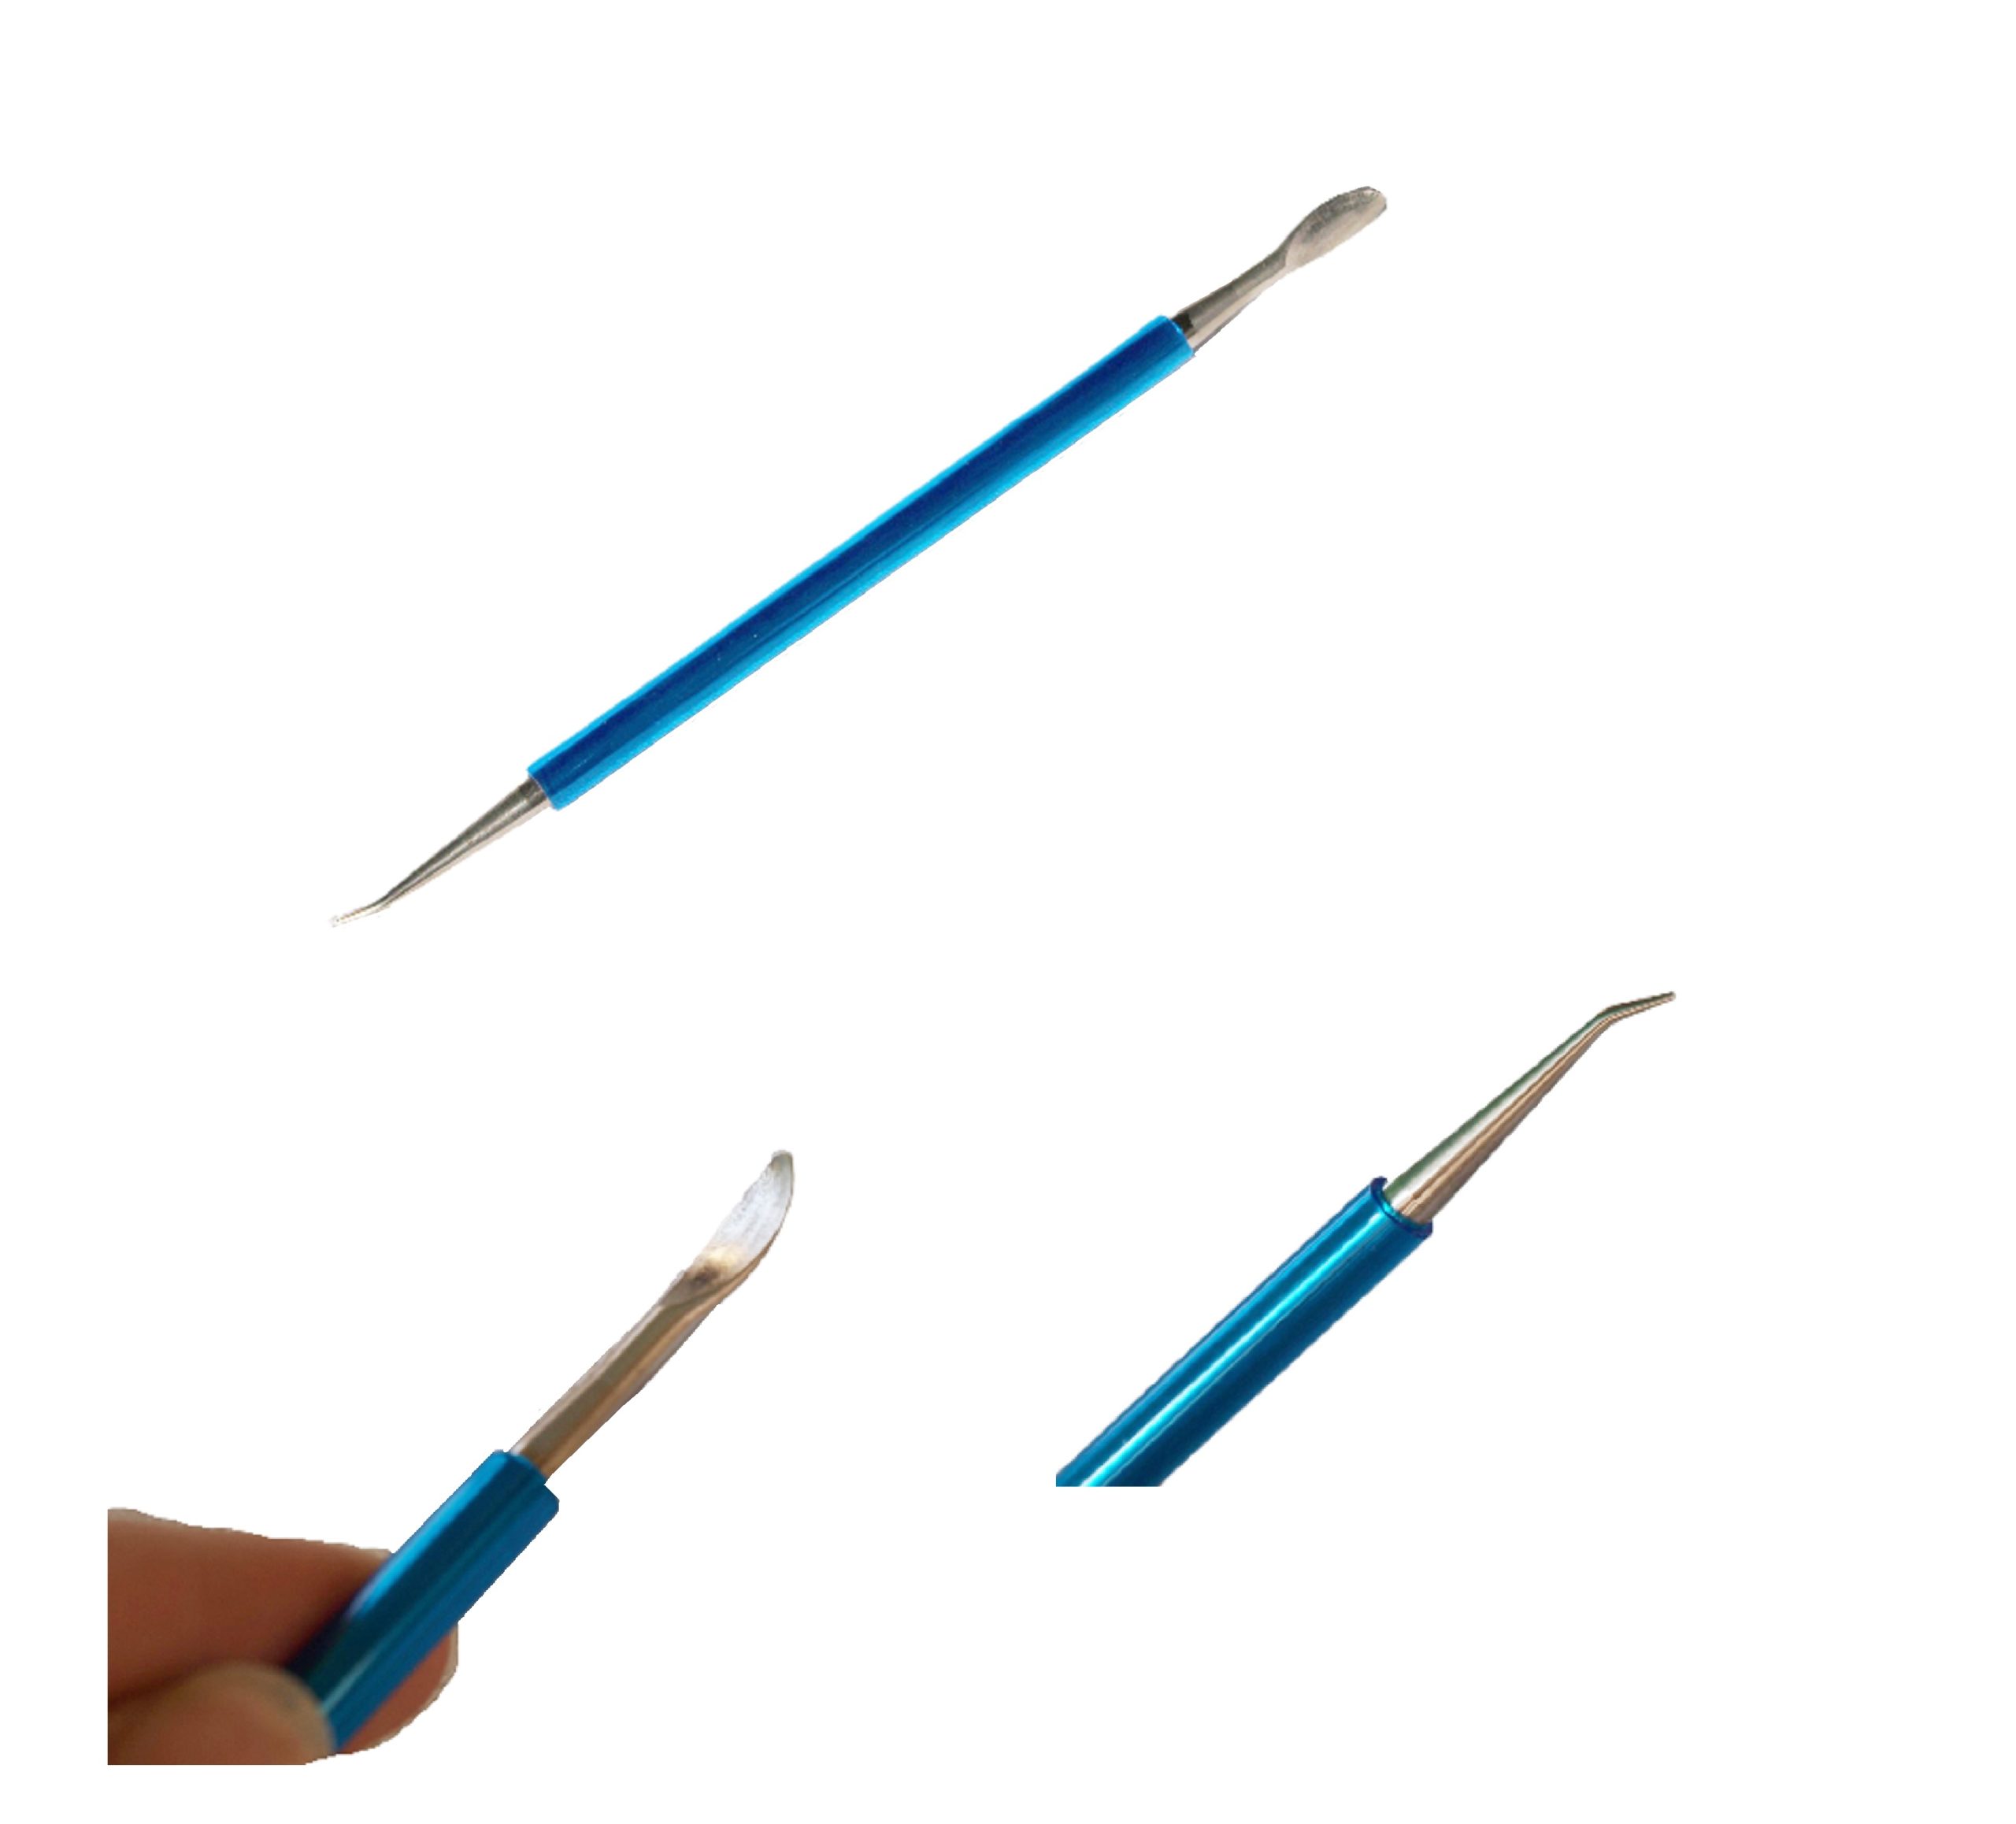 Sculpting tool spatula and claw. Blue grip.